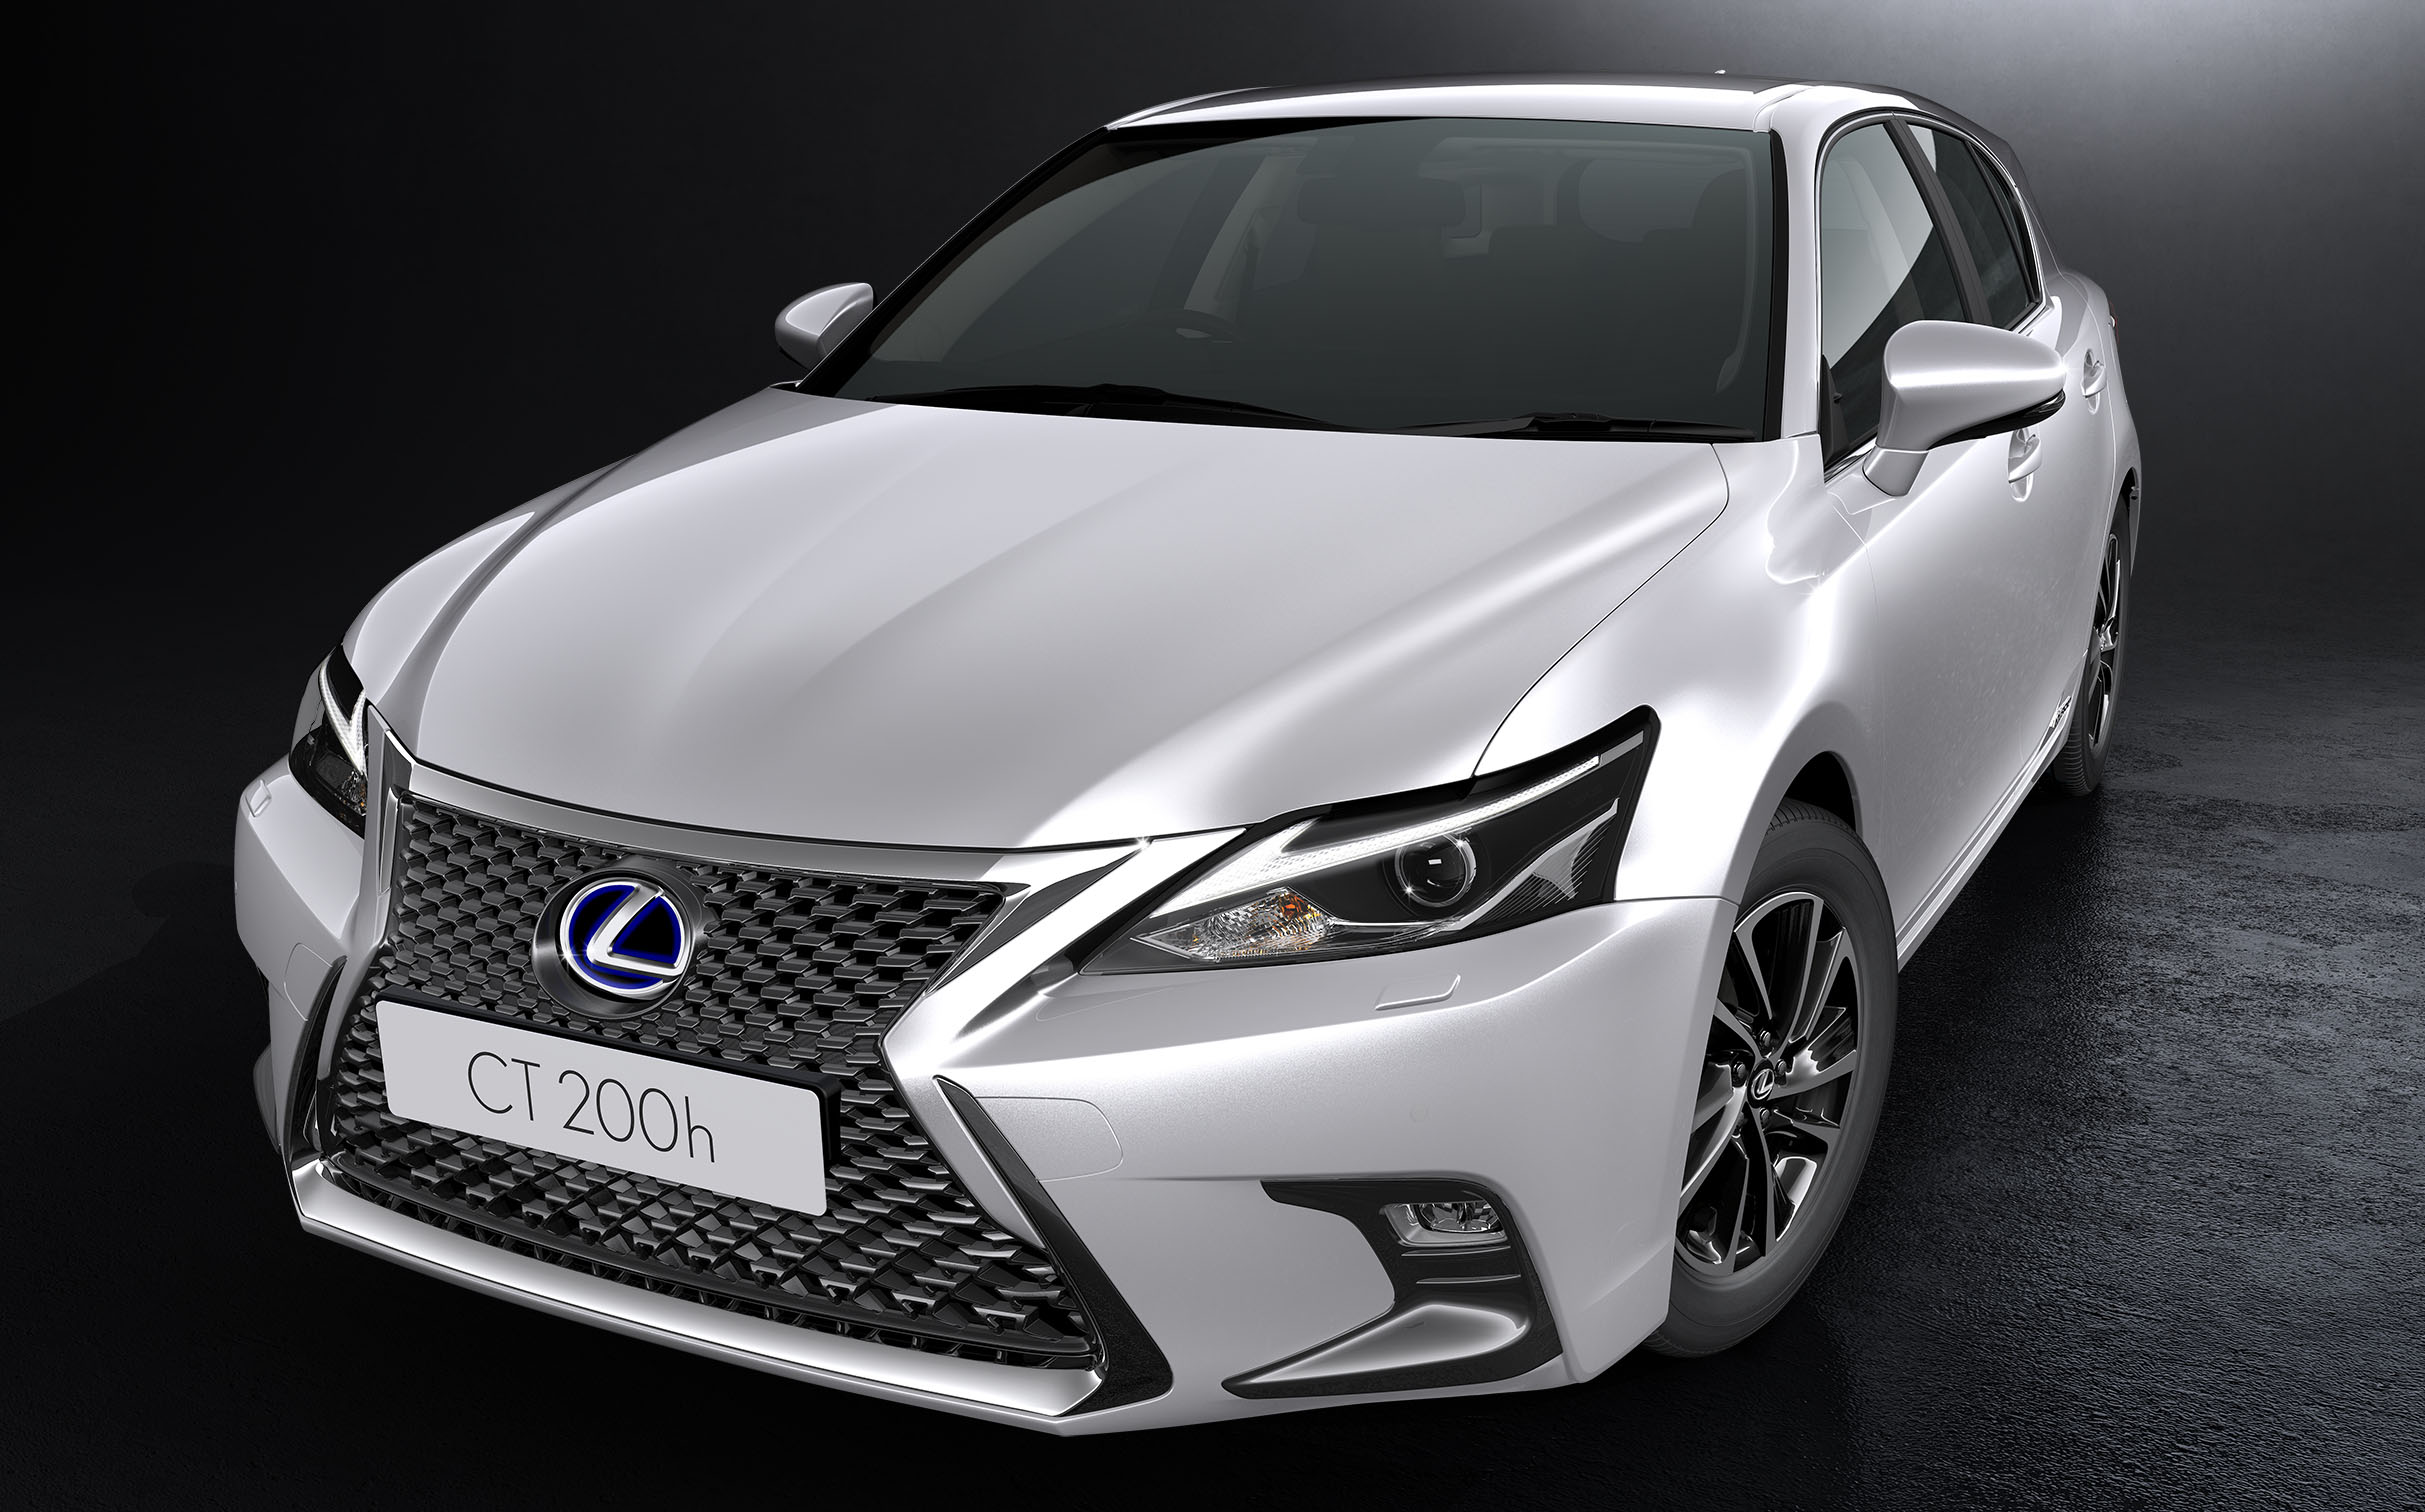 2018 Lexus CT 200h revealed with new styling, tech 2018